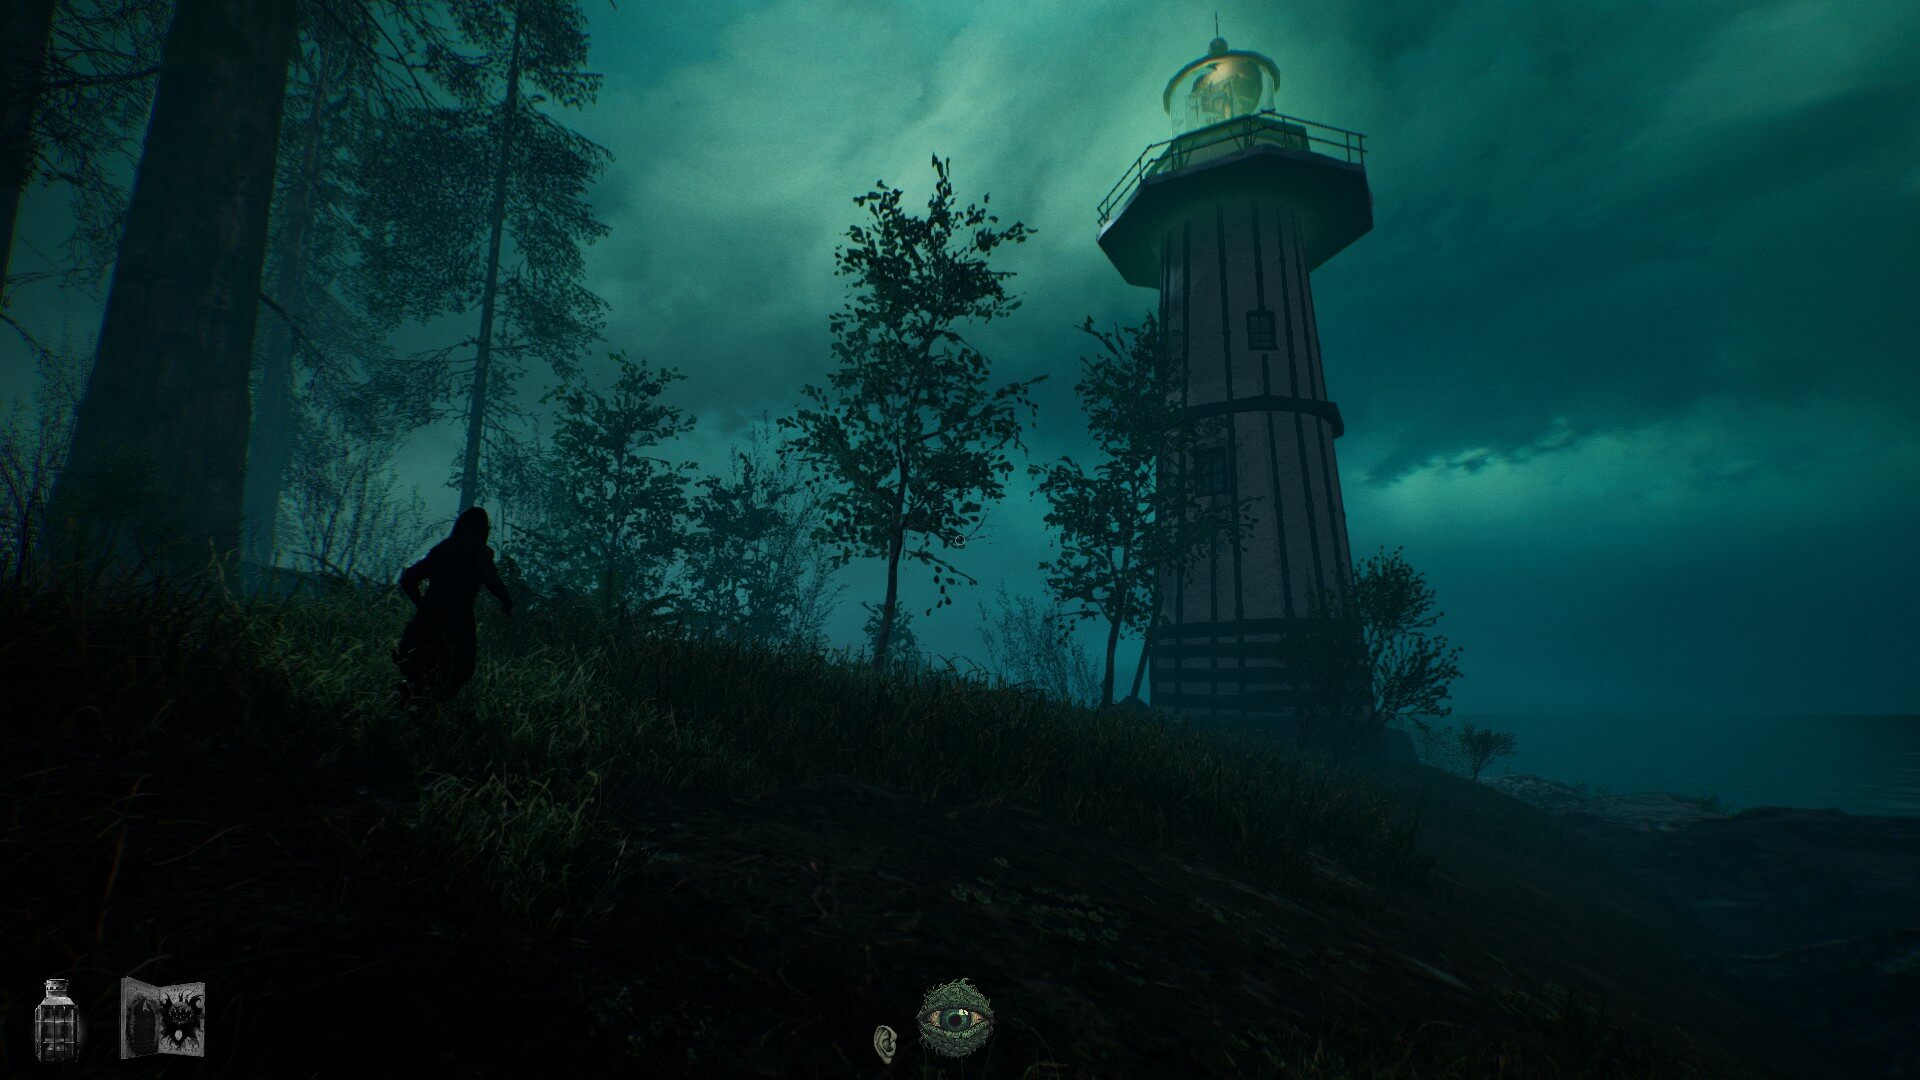 A lighthouse sits atop a hill of a gloomy landscape. A black figure runs through the foliage towards it